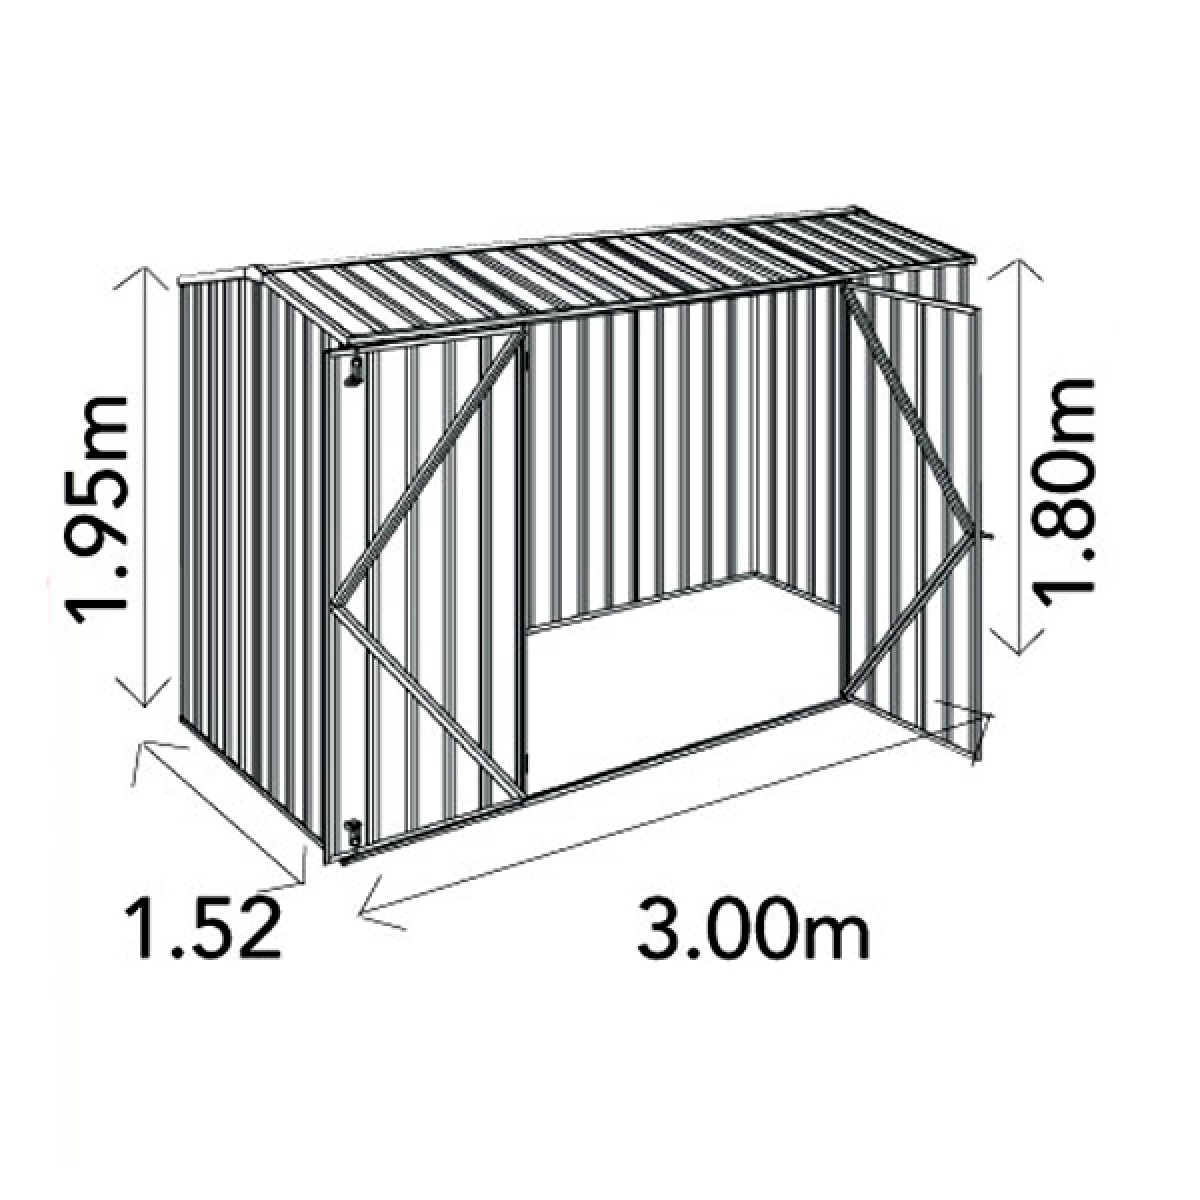 Absco Premier Garden Shed Line Drawing